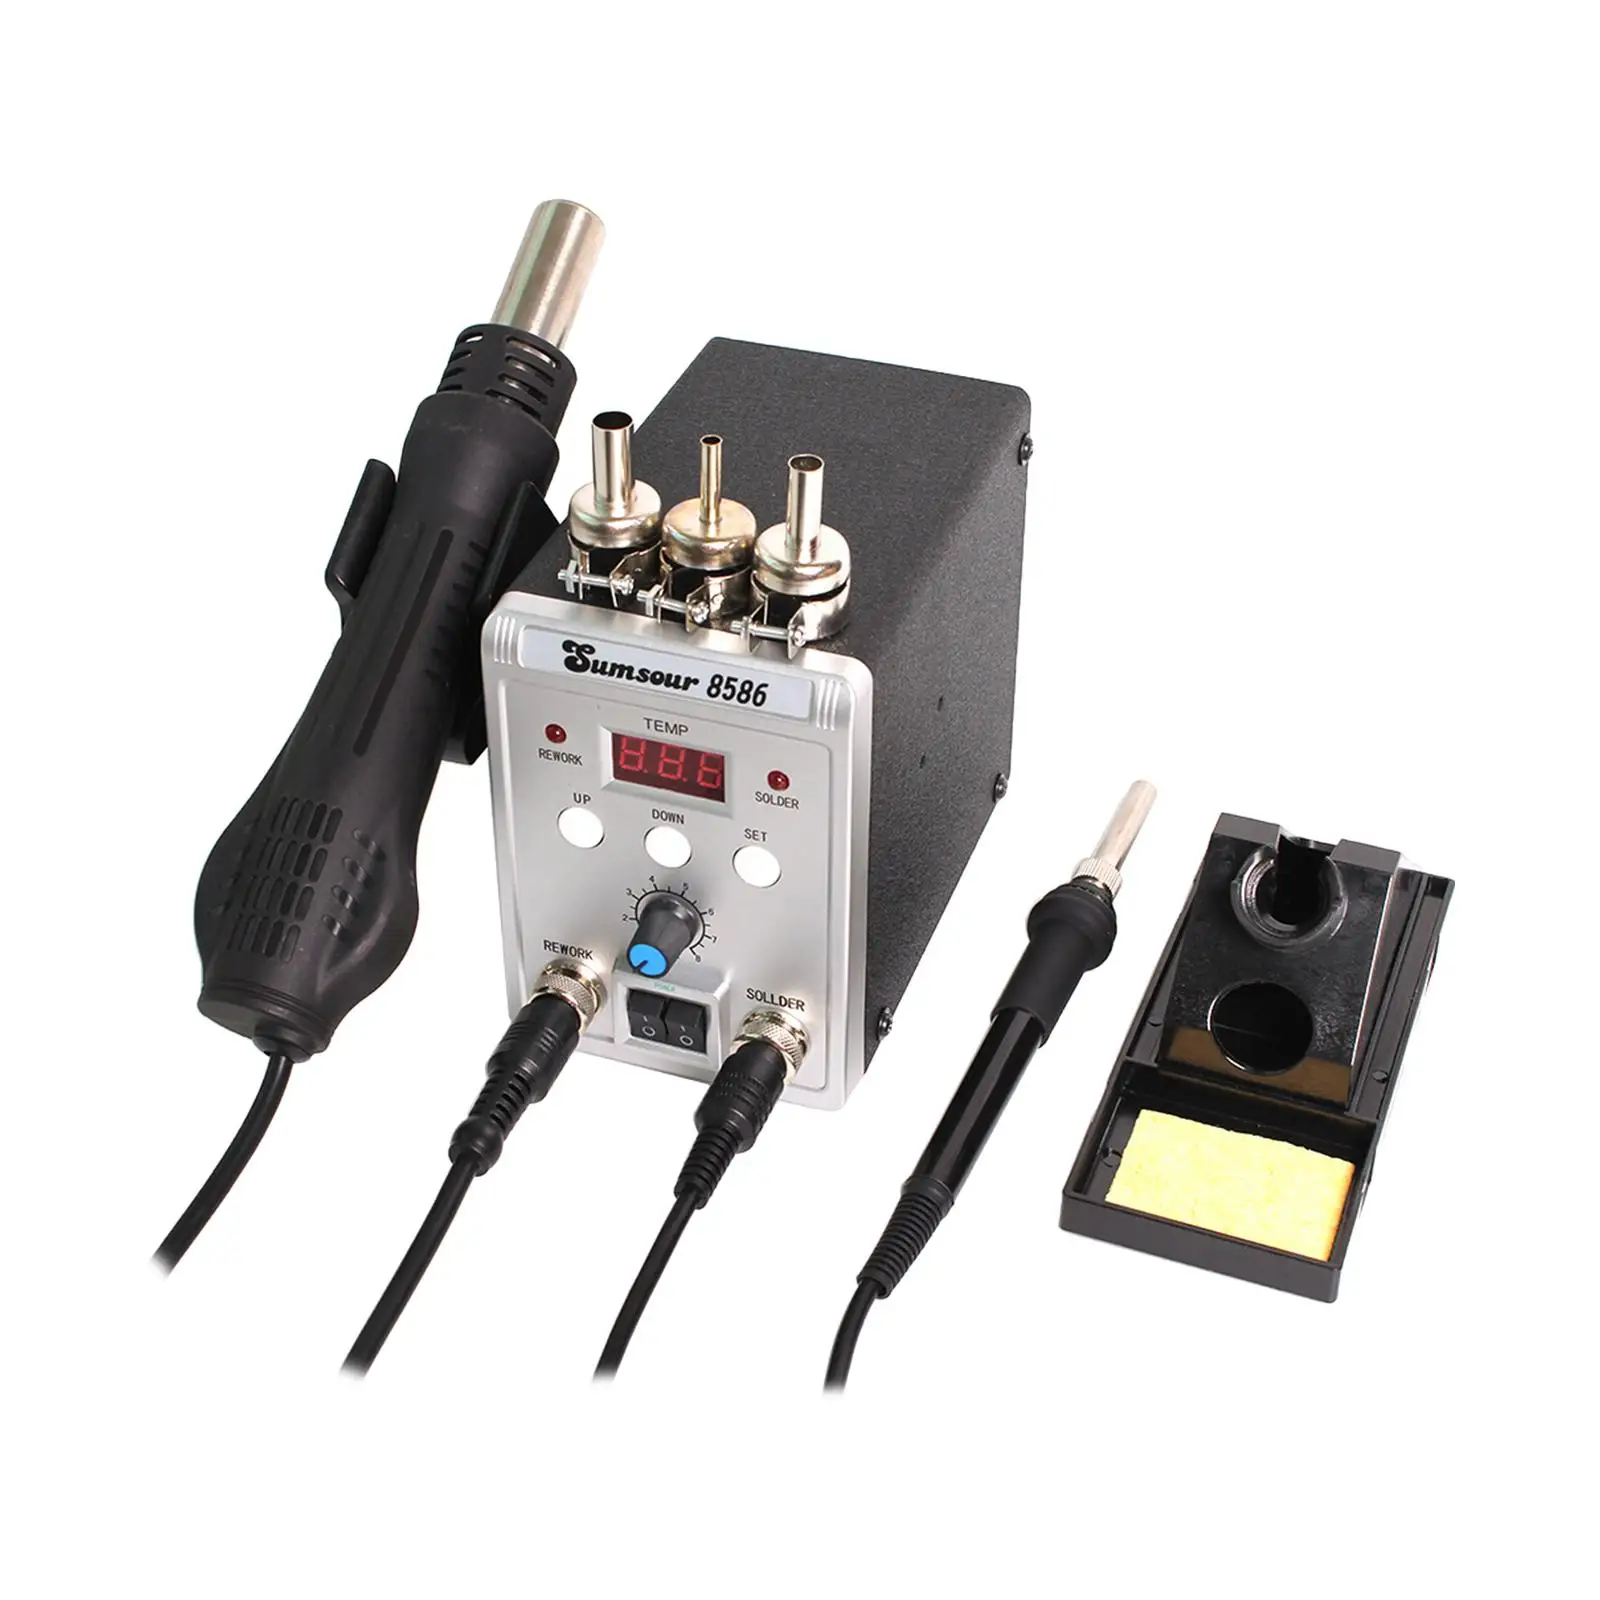 60W Soldering Iron Station with Metal Holder Professional Digital Soldering Station for DIY Repairs Home Appliance Maintenance